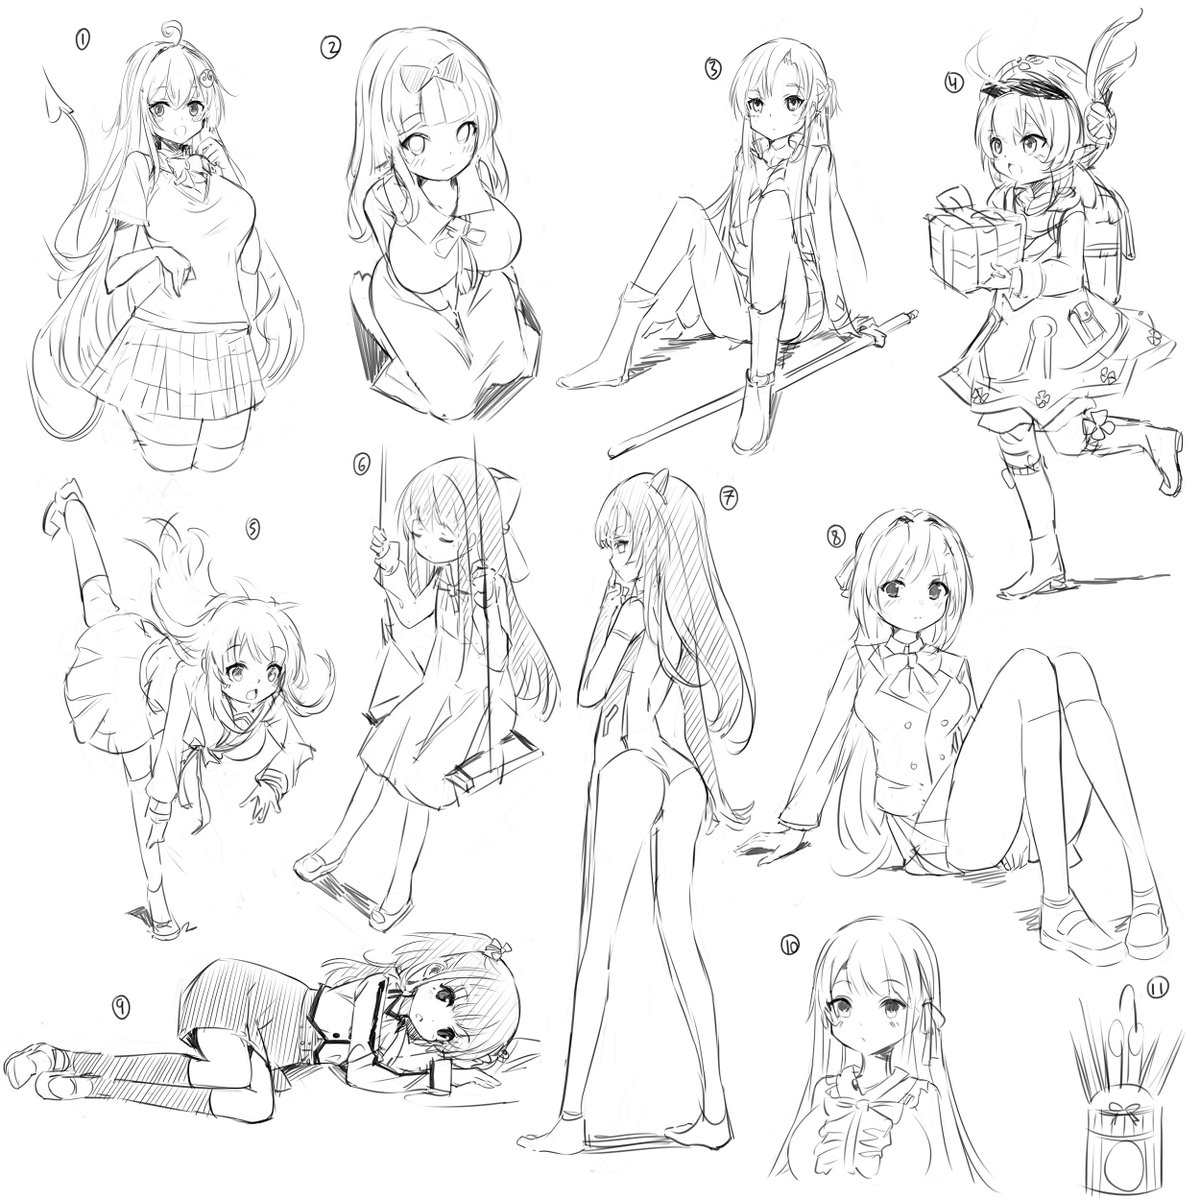 I have been doing a guess-what-character I'm drawing game with chat while practicing (・v・) how many do you recognize 